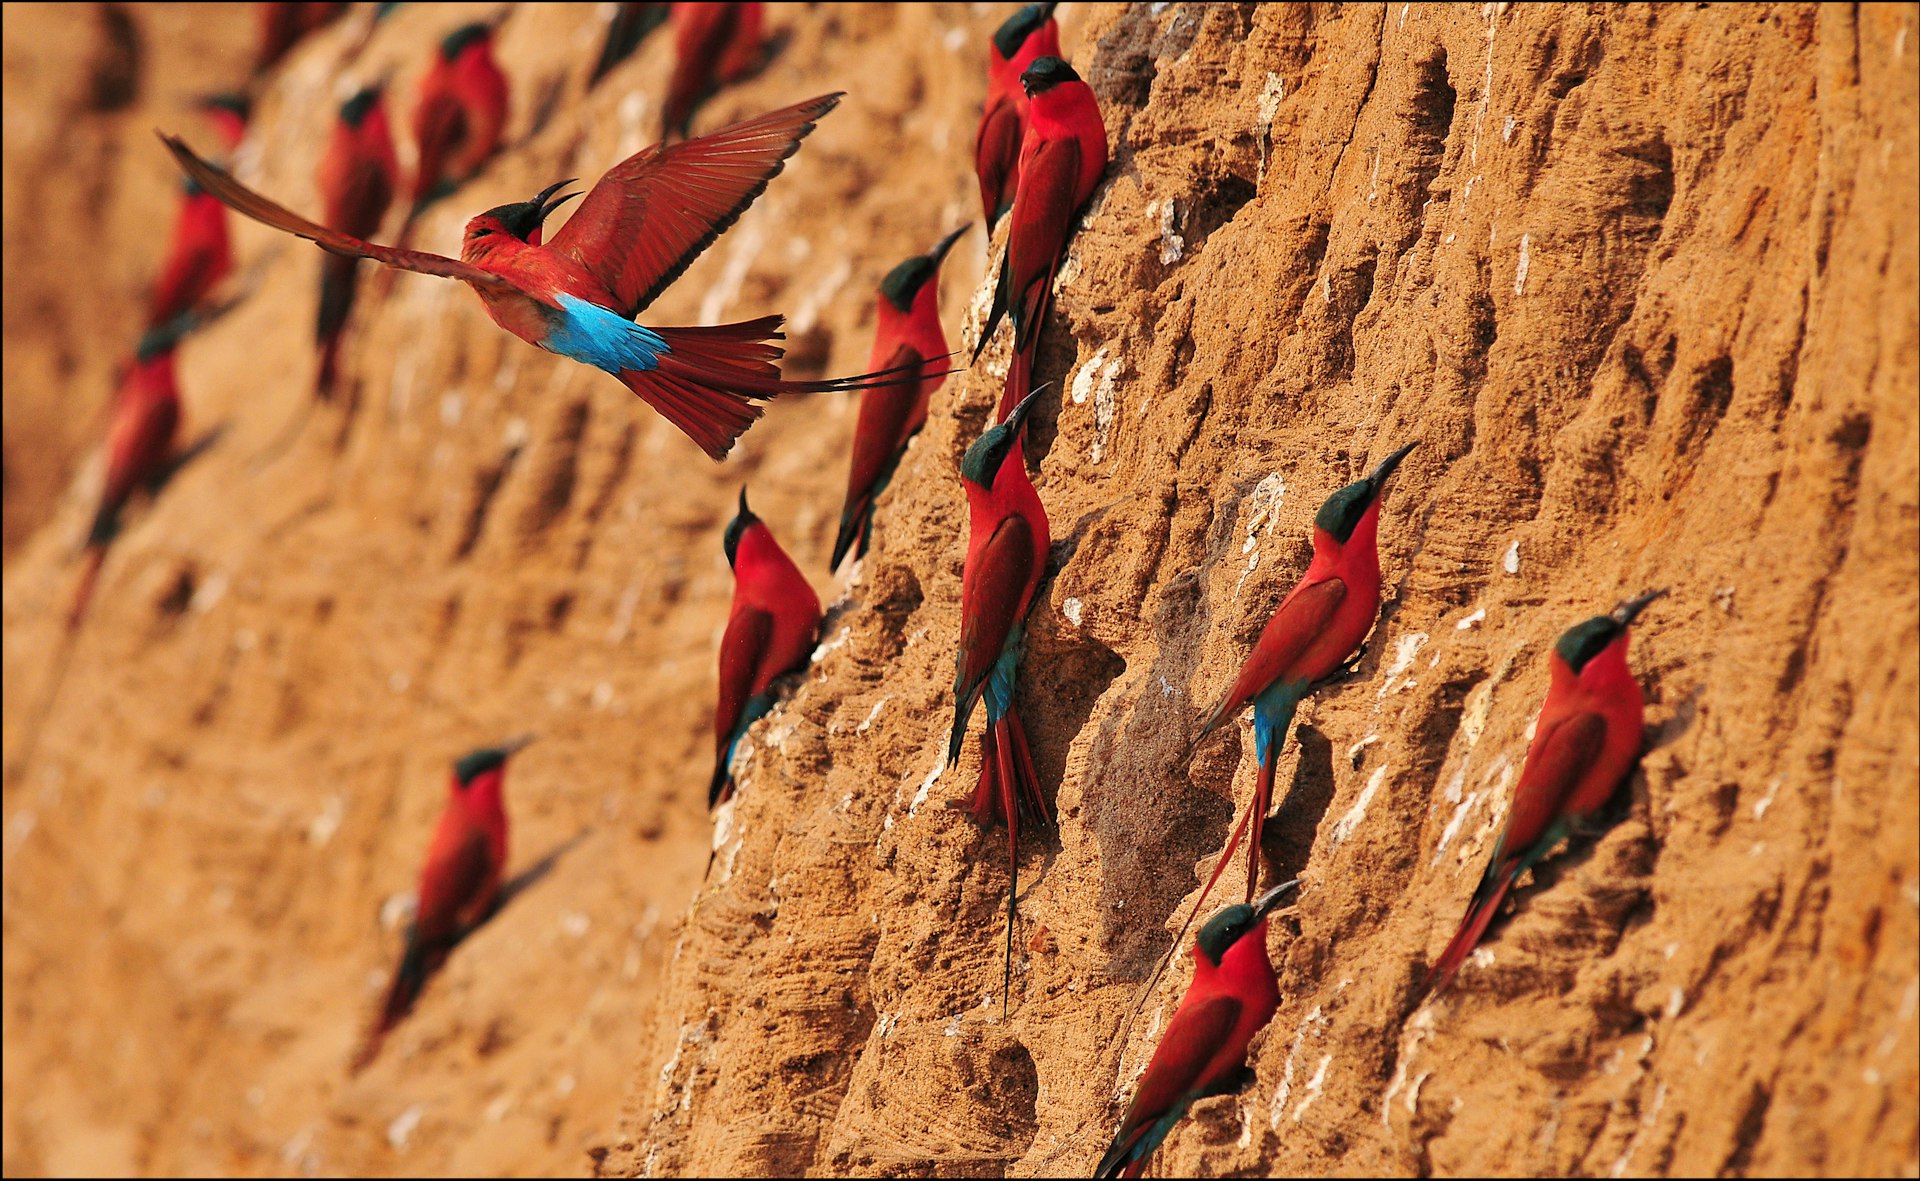 Several southern carmine bee-eaters perching on an ochre-coloured rock in South Luangwa National Park, Zambia